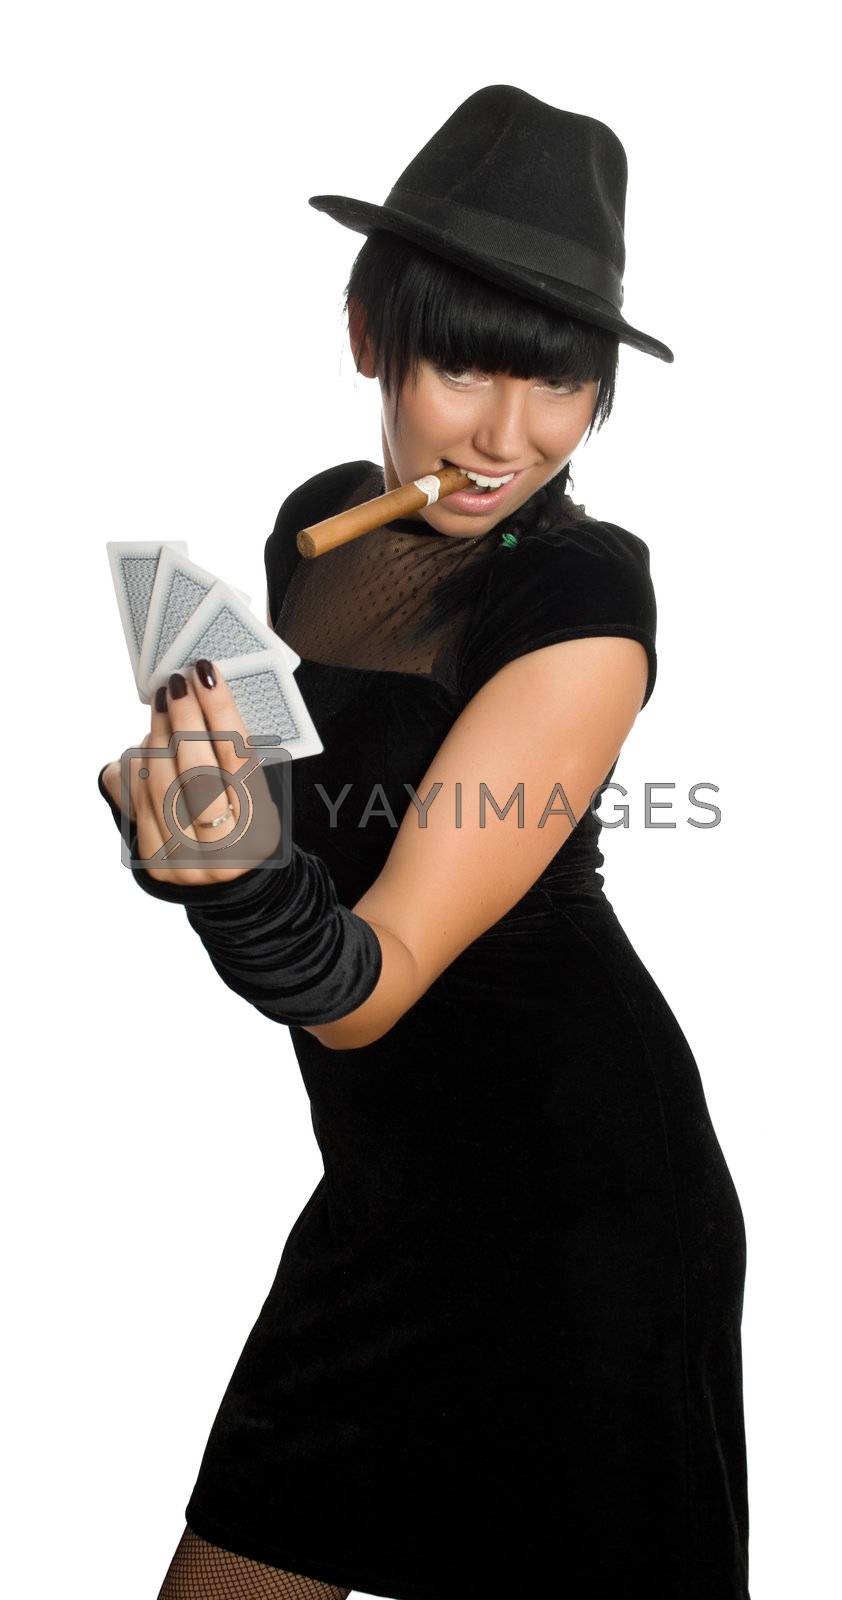 Royalty free image of sexy girl with cigar and cards by AndyTu